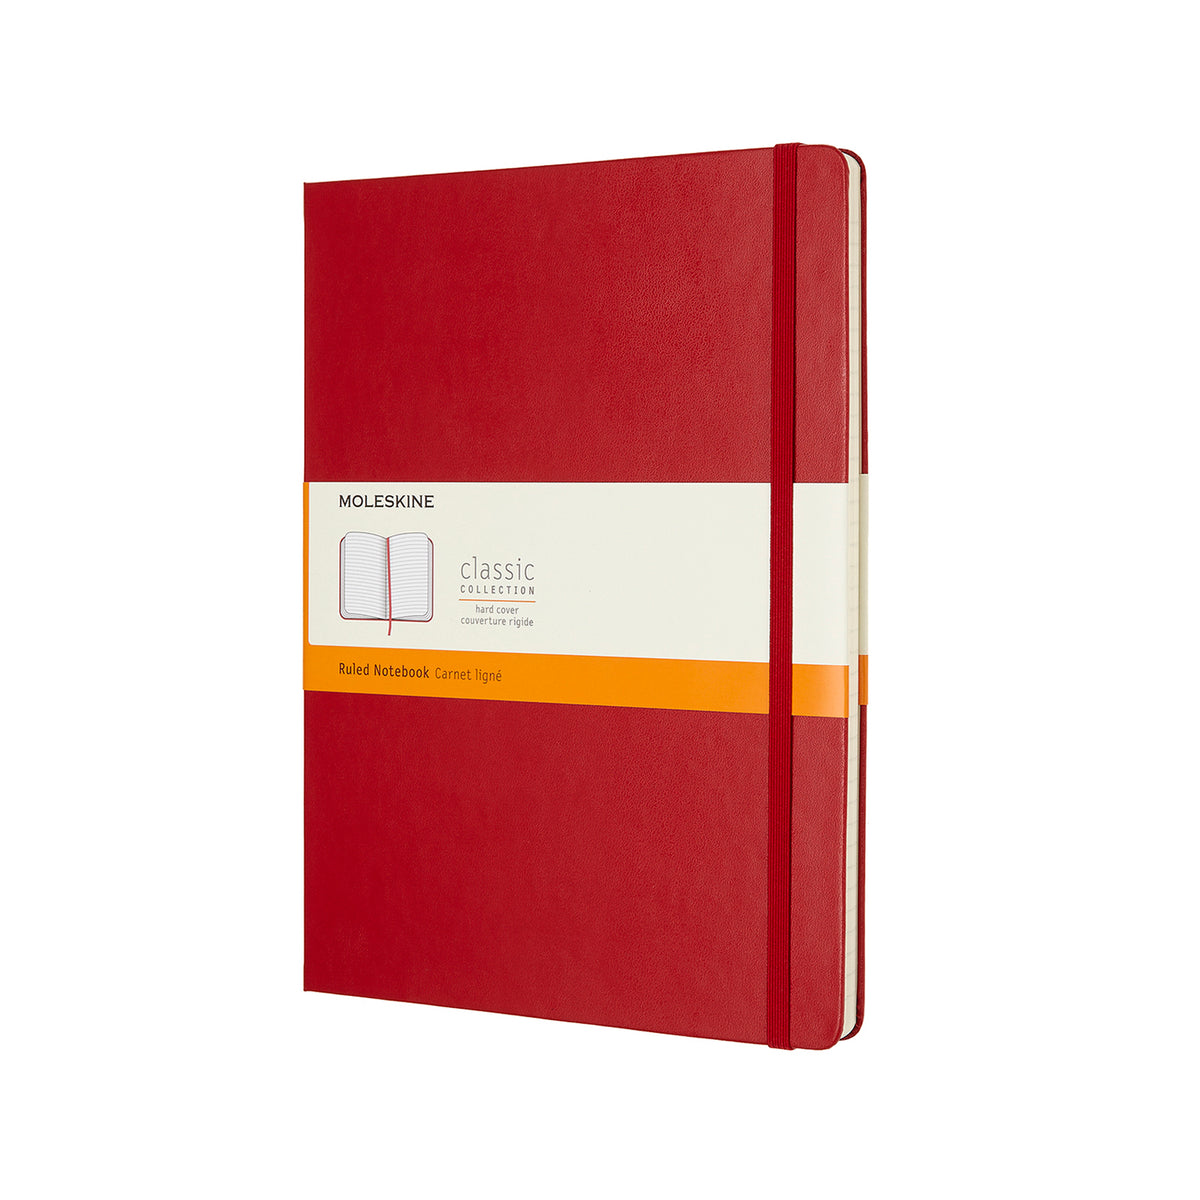 Moleskine - Classic Hard Cover Notebook - Ruled - Extra Large - Scarlet Red